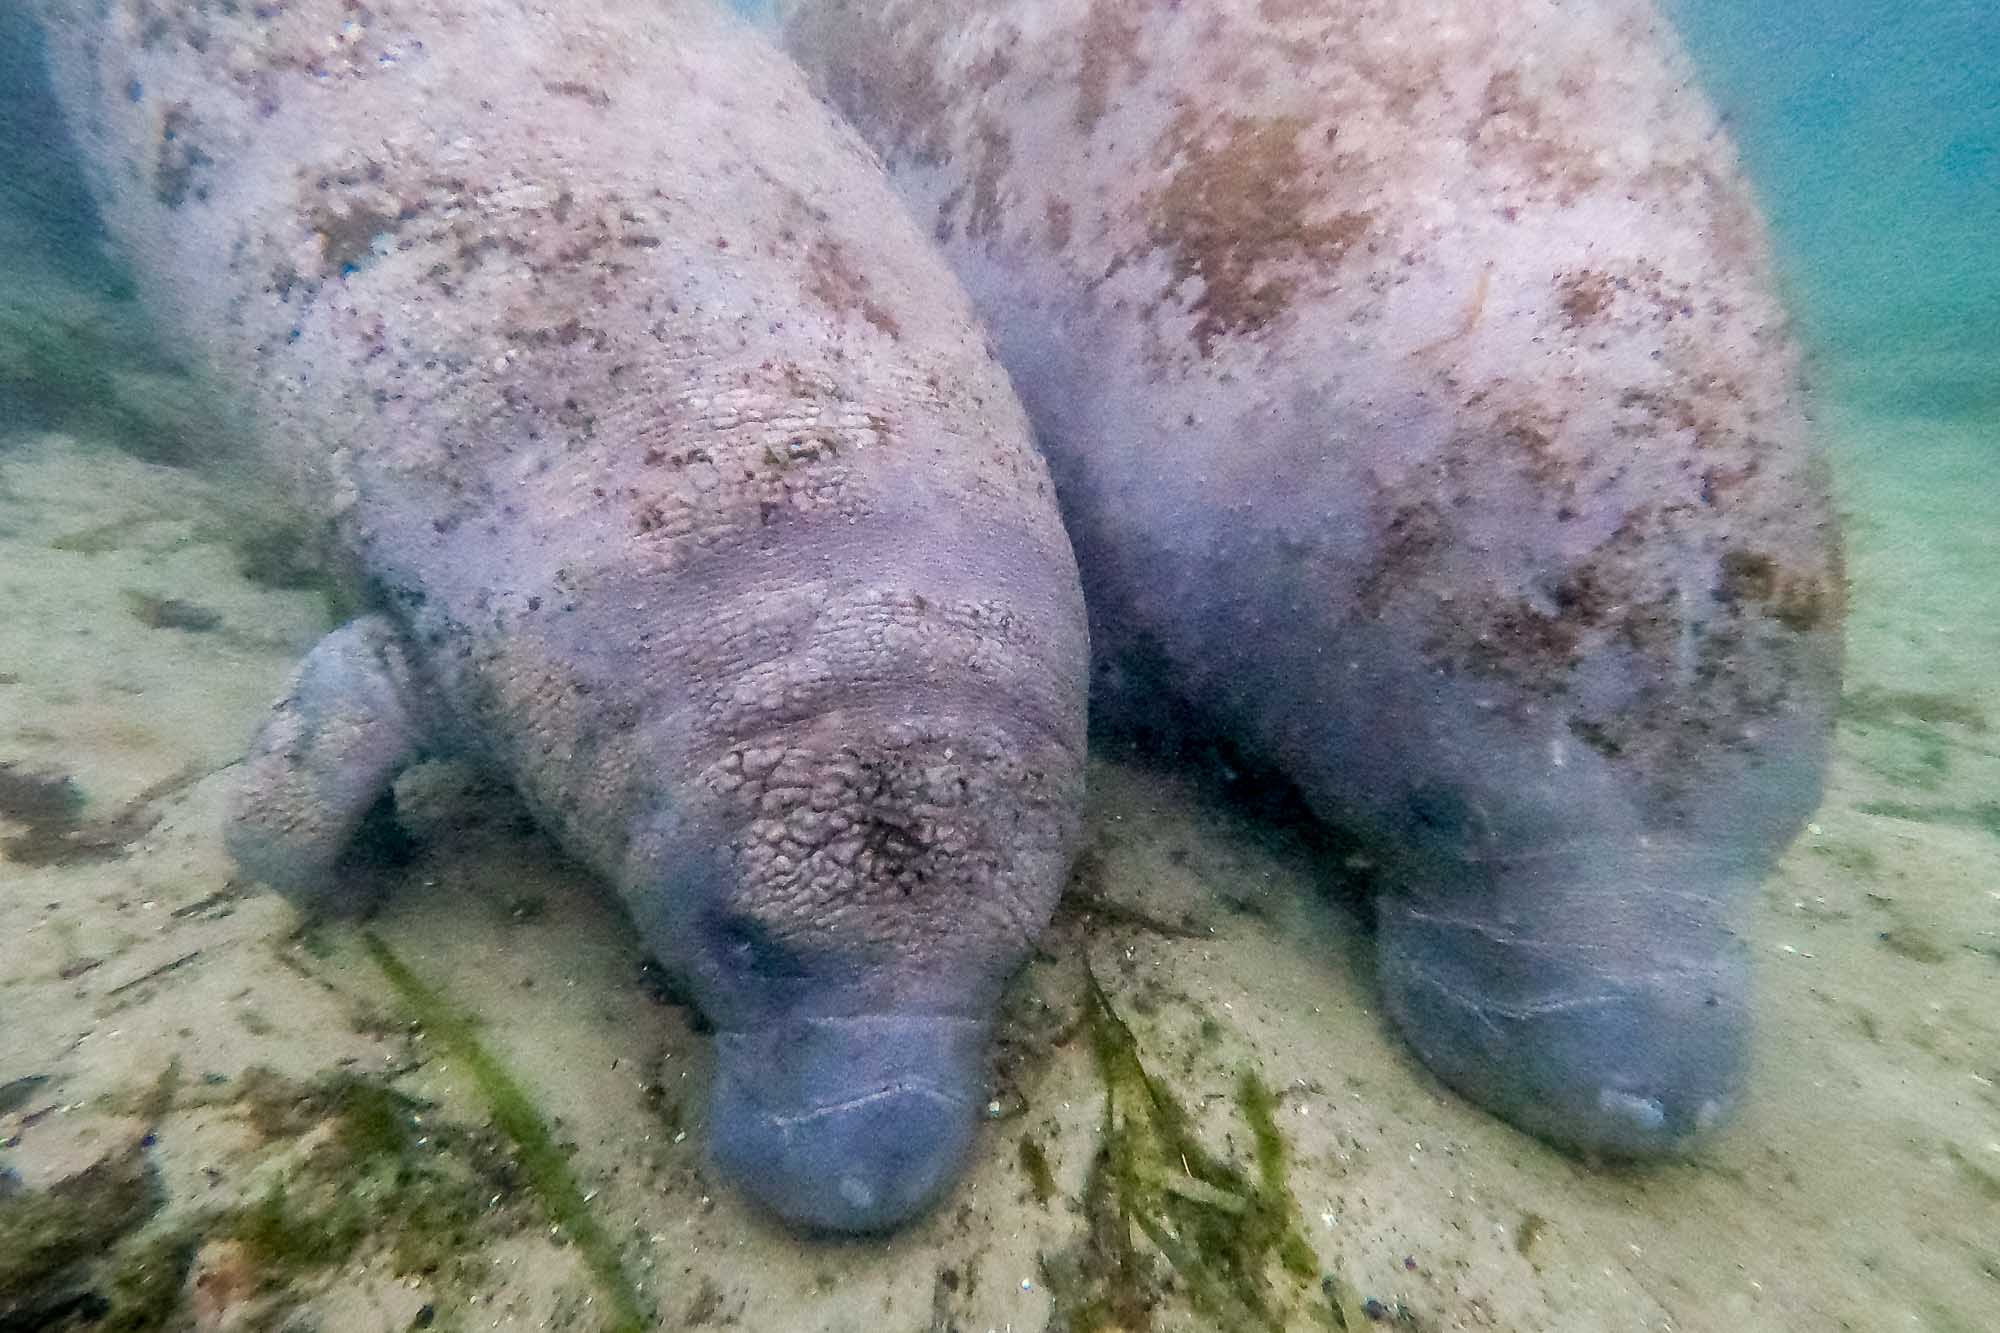 Two manatees side by side on the river bottom